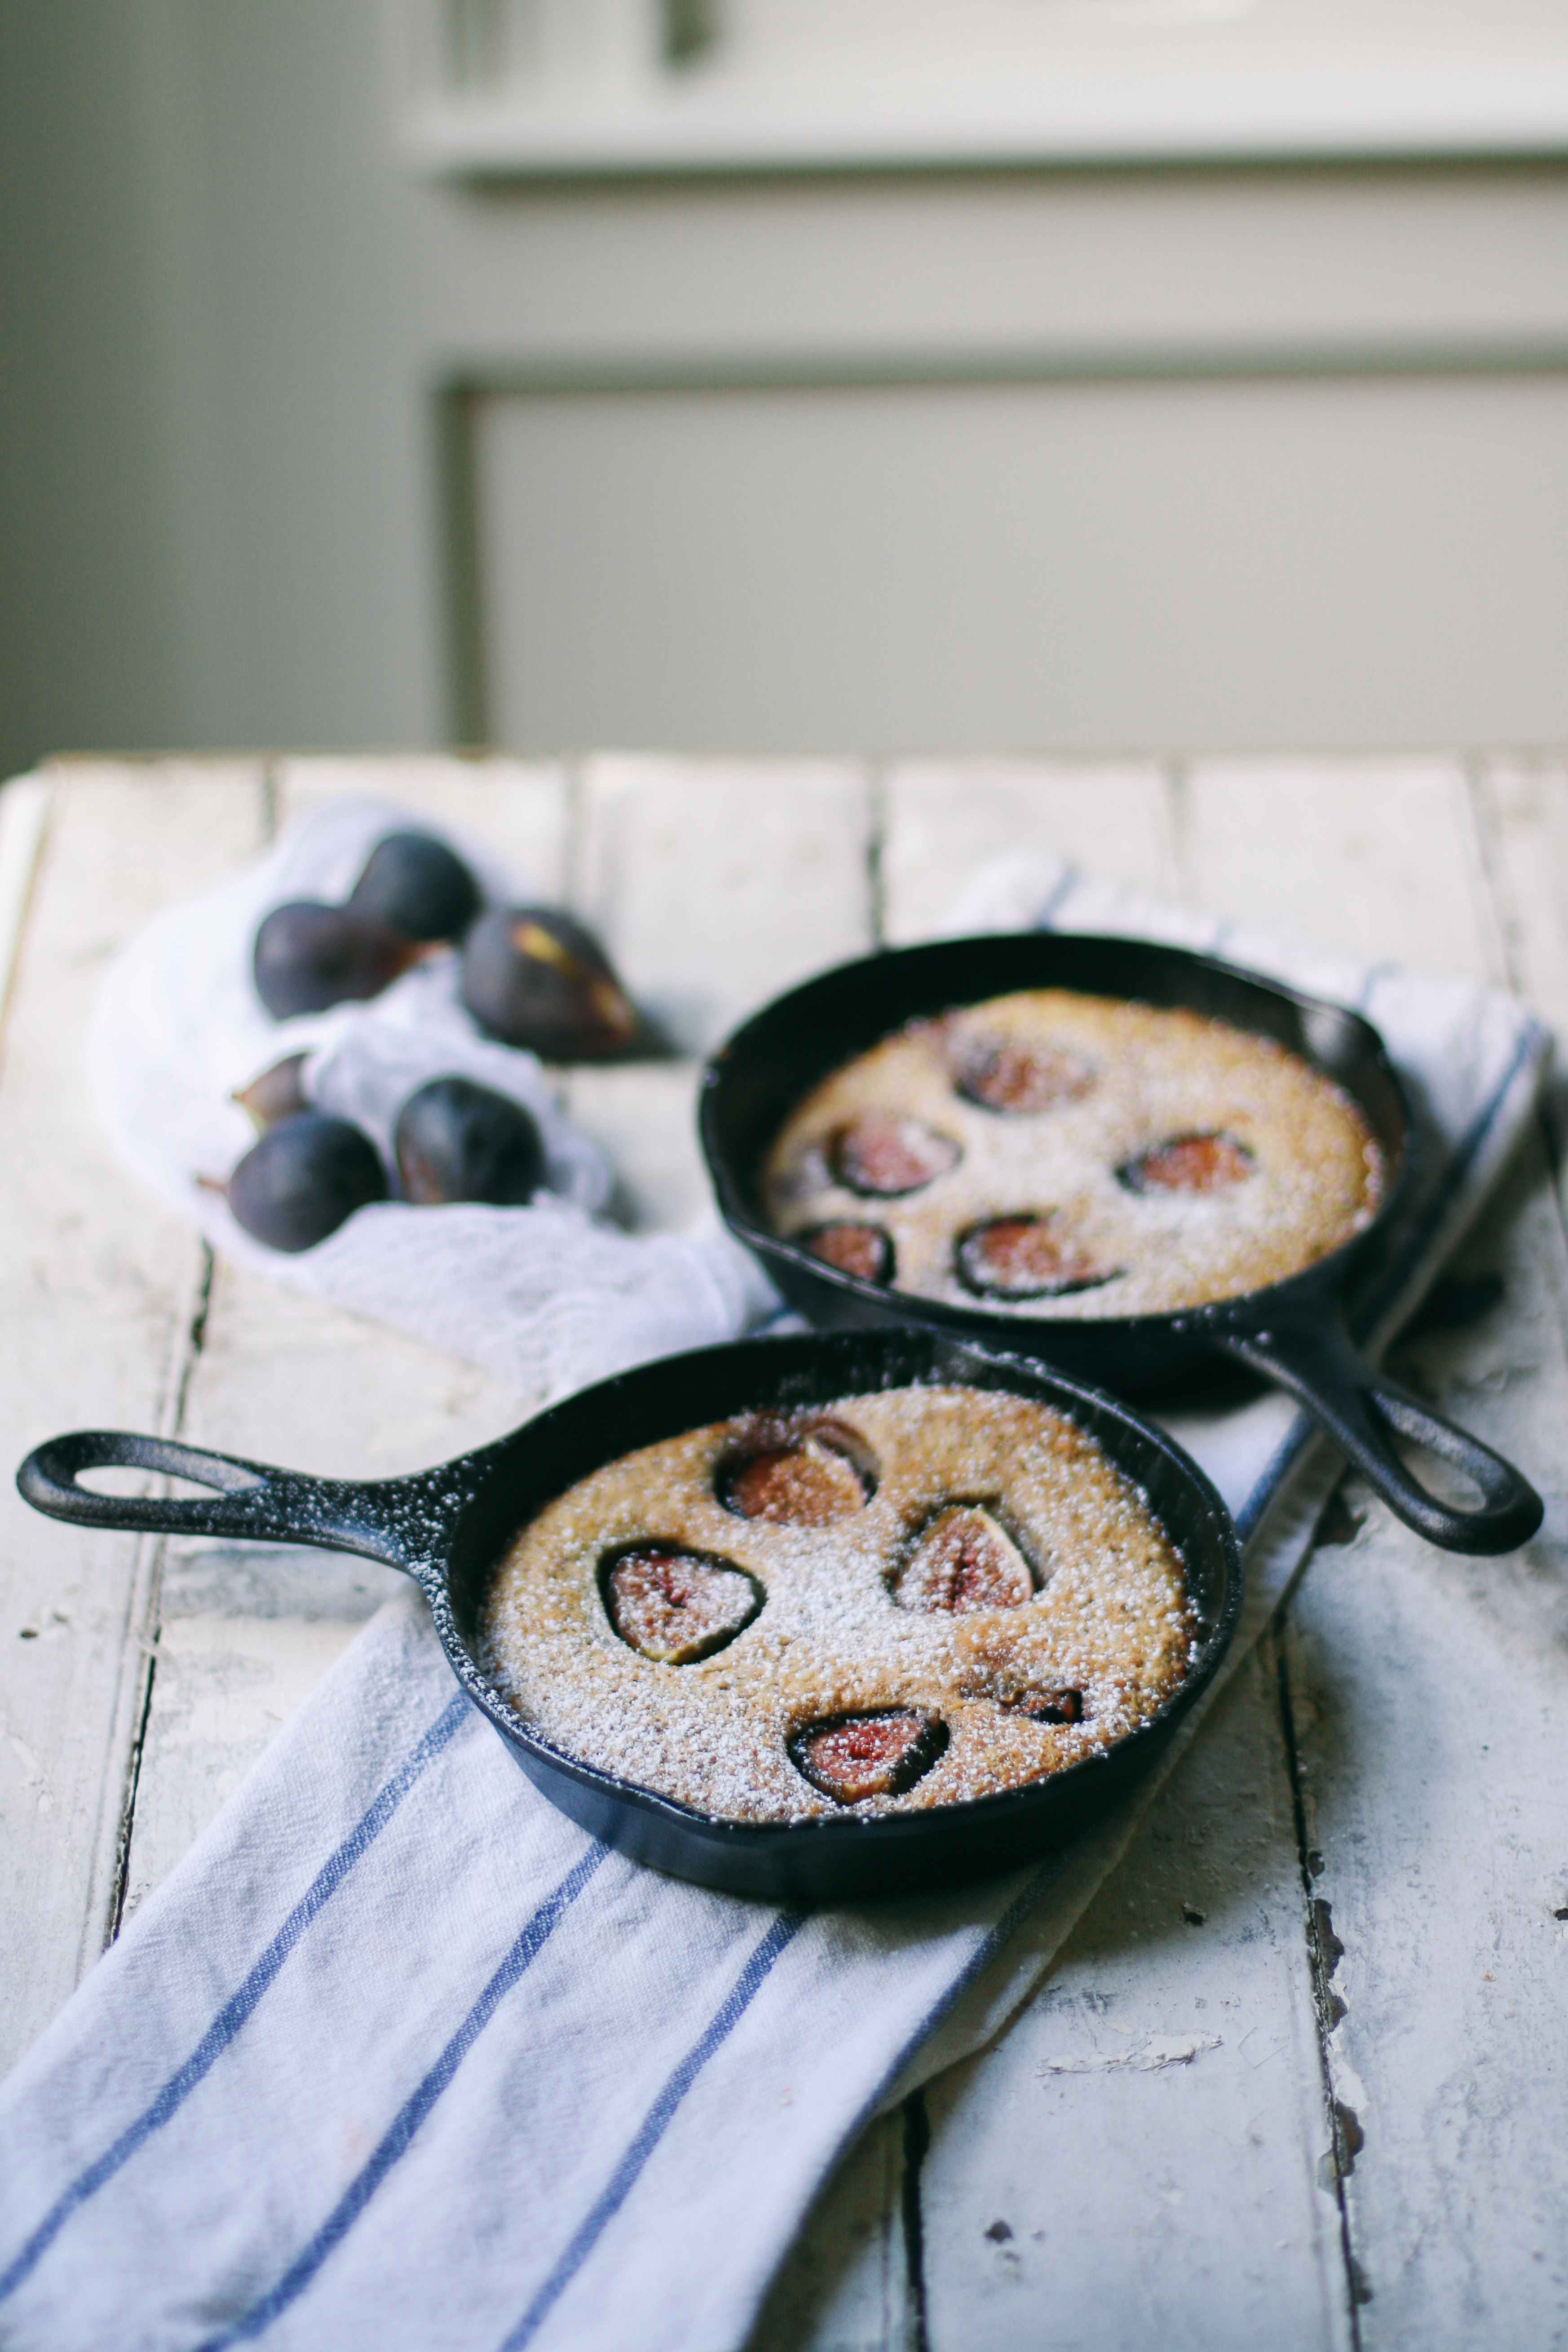 Brown Sugar & Fig Clafoutis | I Will Not Eat Oysters